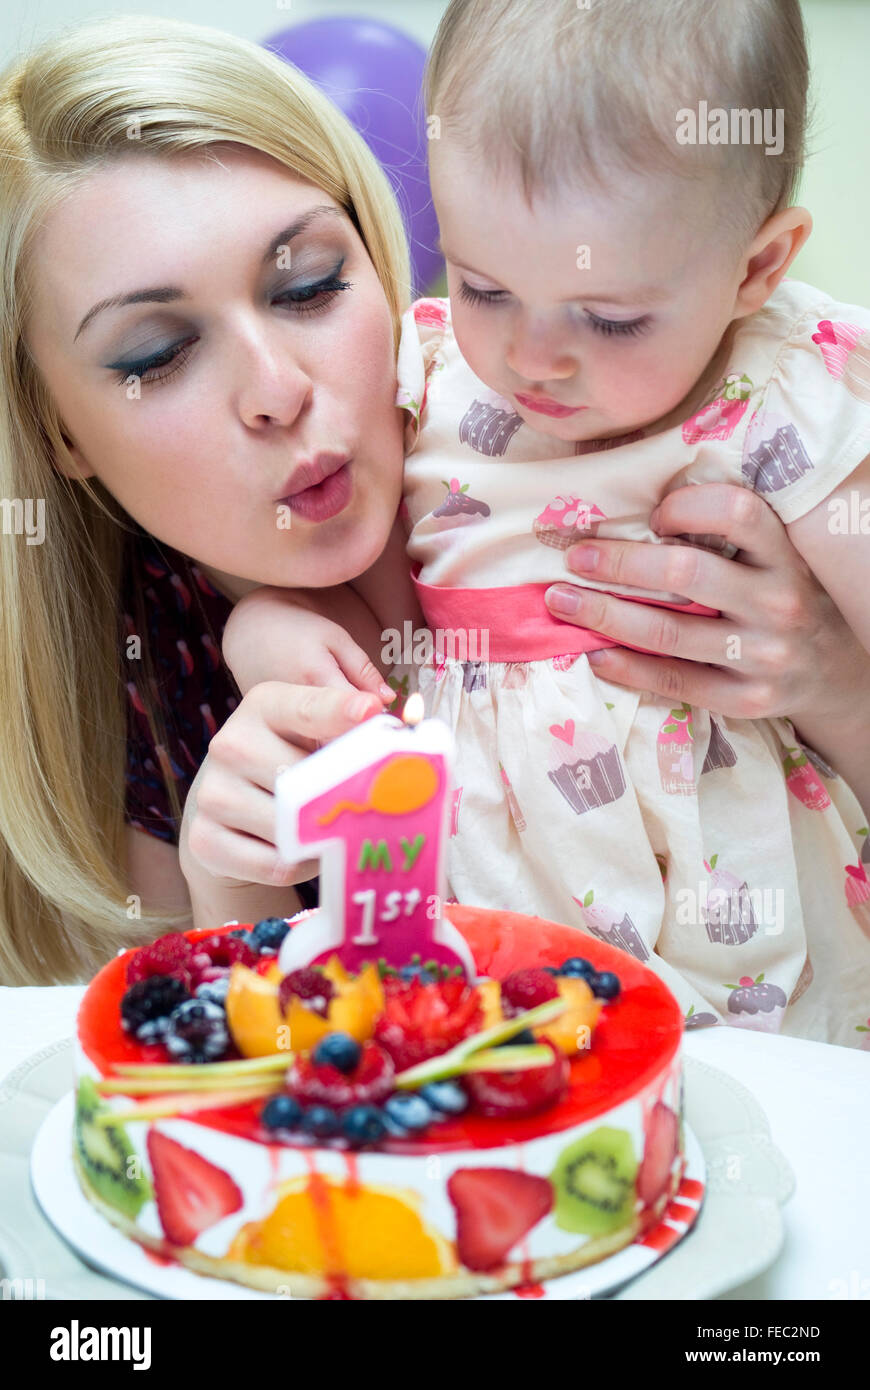 Mother celebrating baby's first birthday Stock Photo